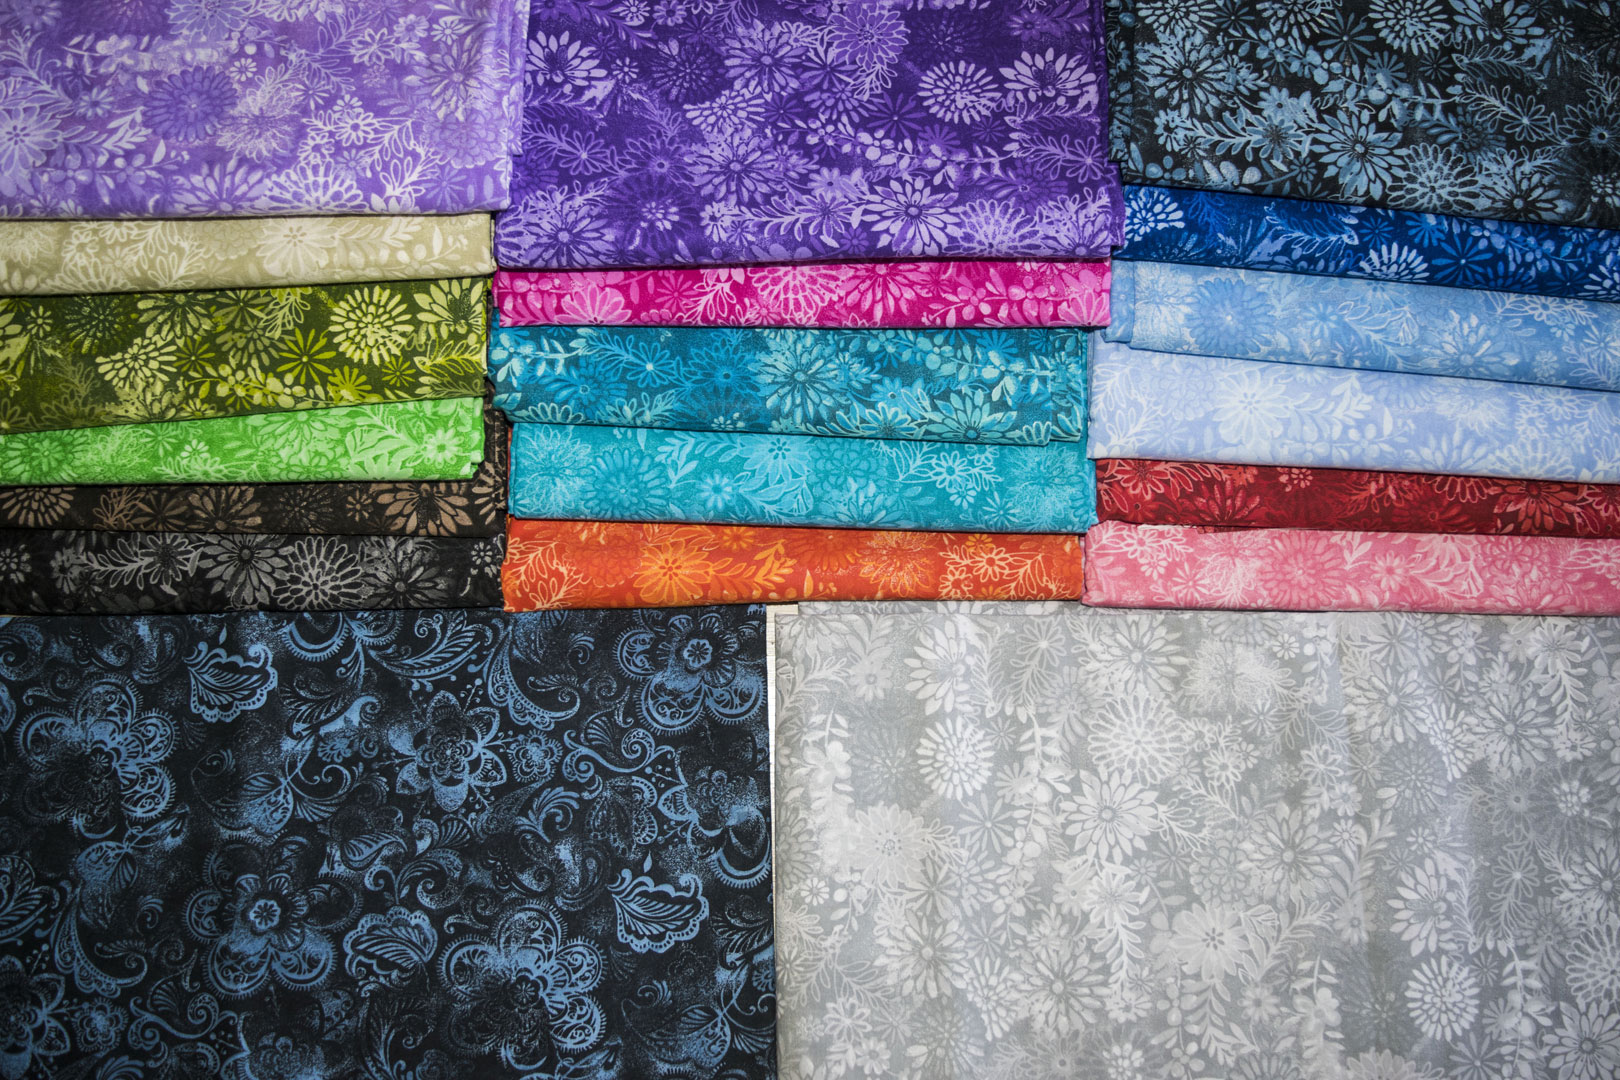   SPW 167: Batiks (45")   Our Batik Patterns are finished at both 45" &amp; 108". For the 108" colors, see SPW 182. 